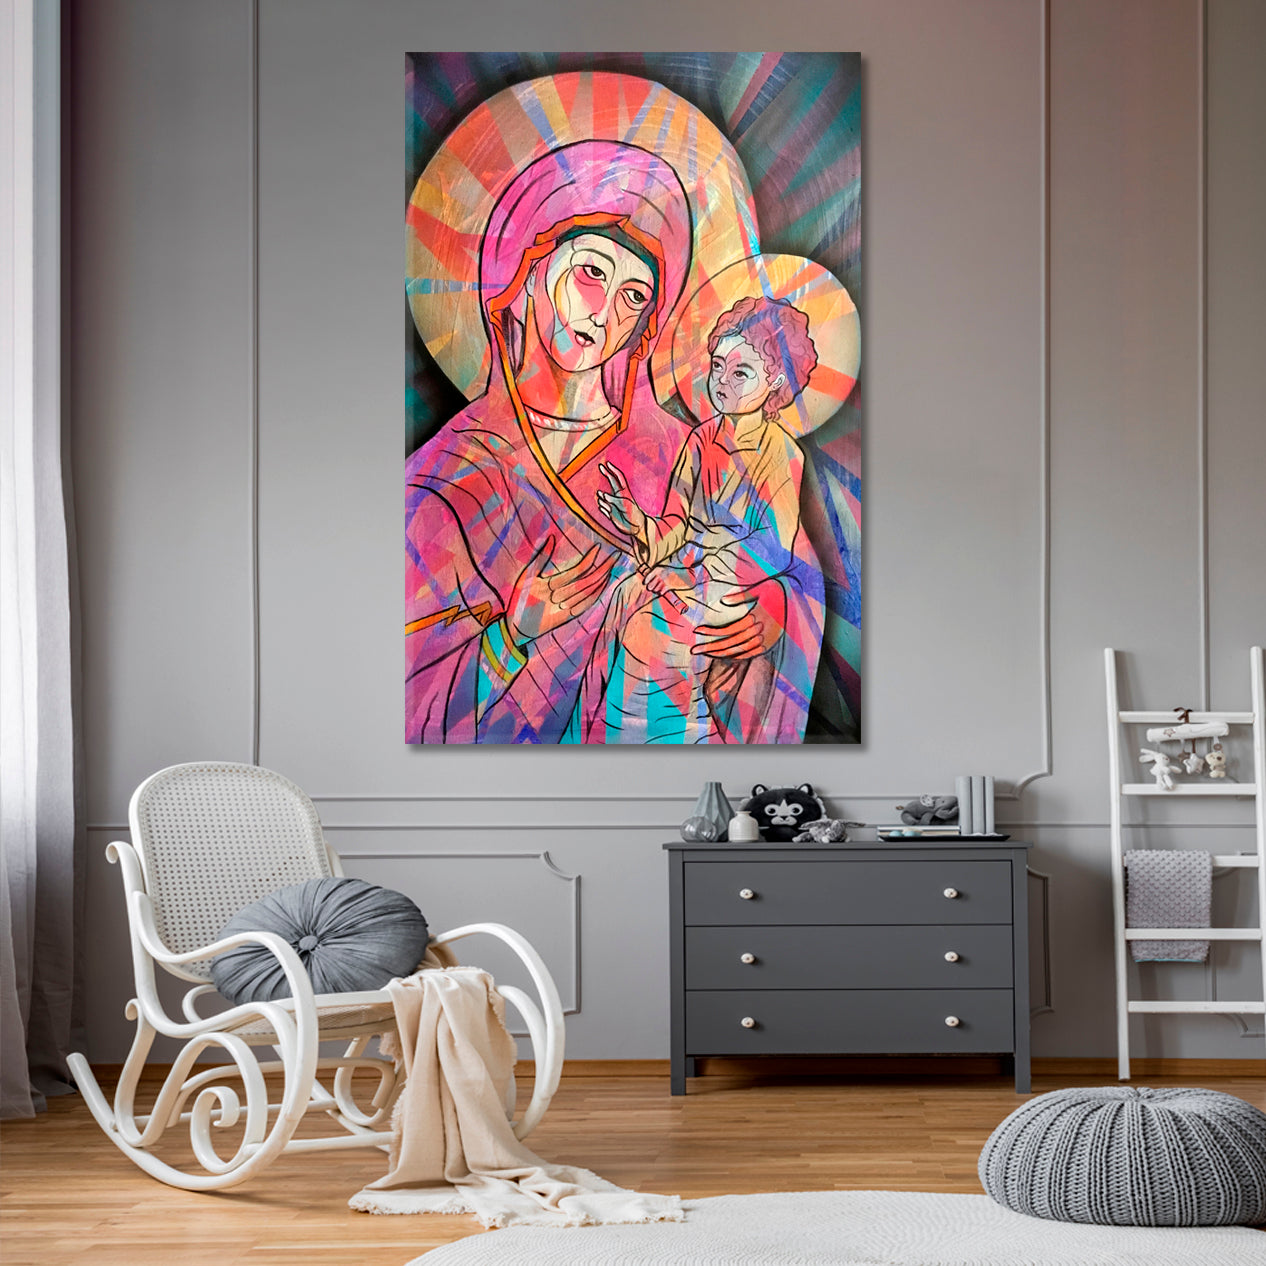 CONTEMPORARY Cubist Virgin Mary and Child Religious Modern Art Artesty 1 Panel 16"x24" 